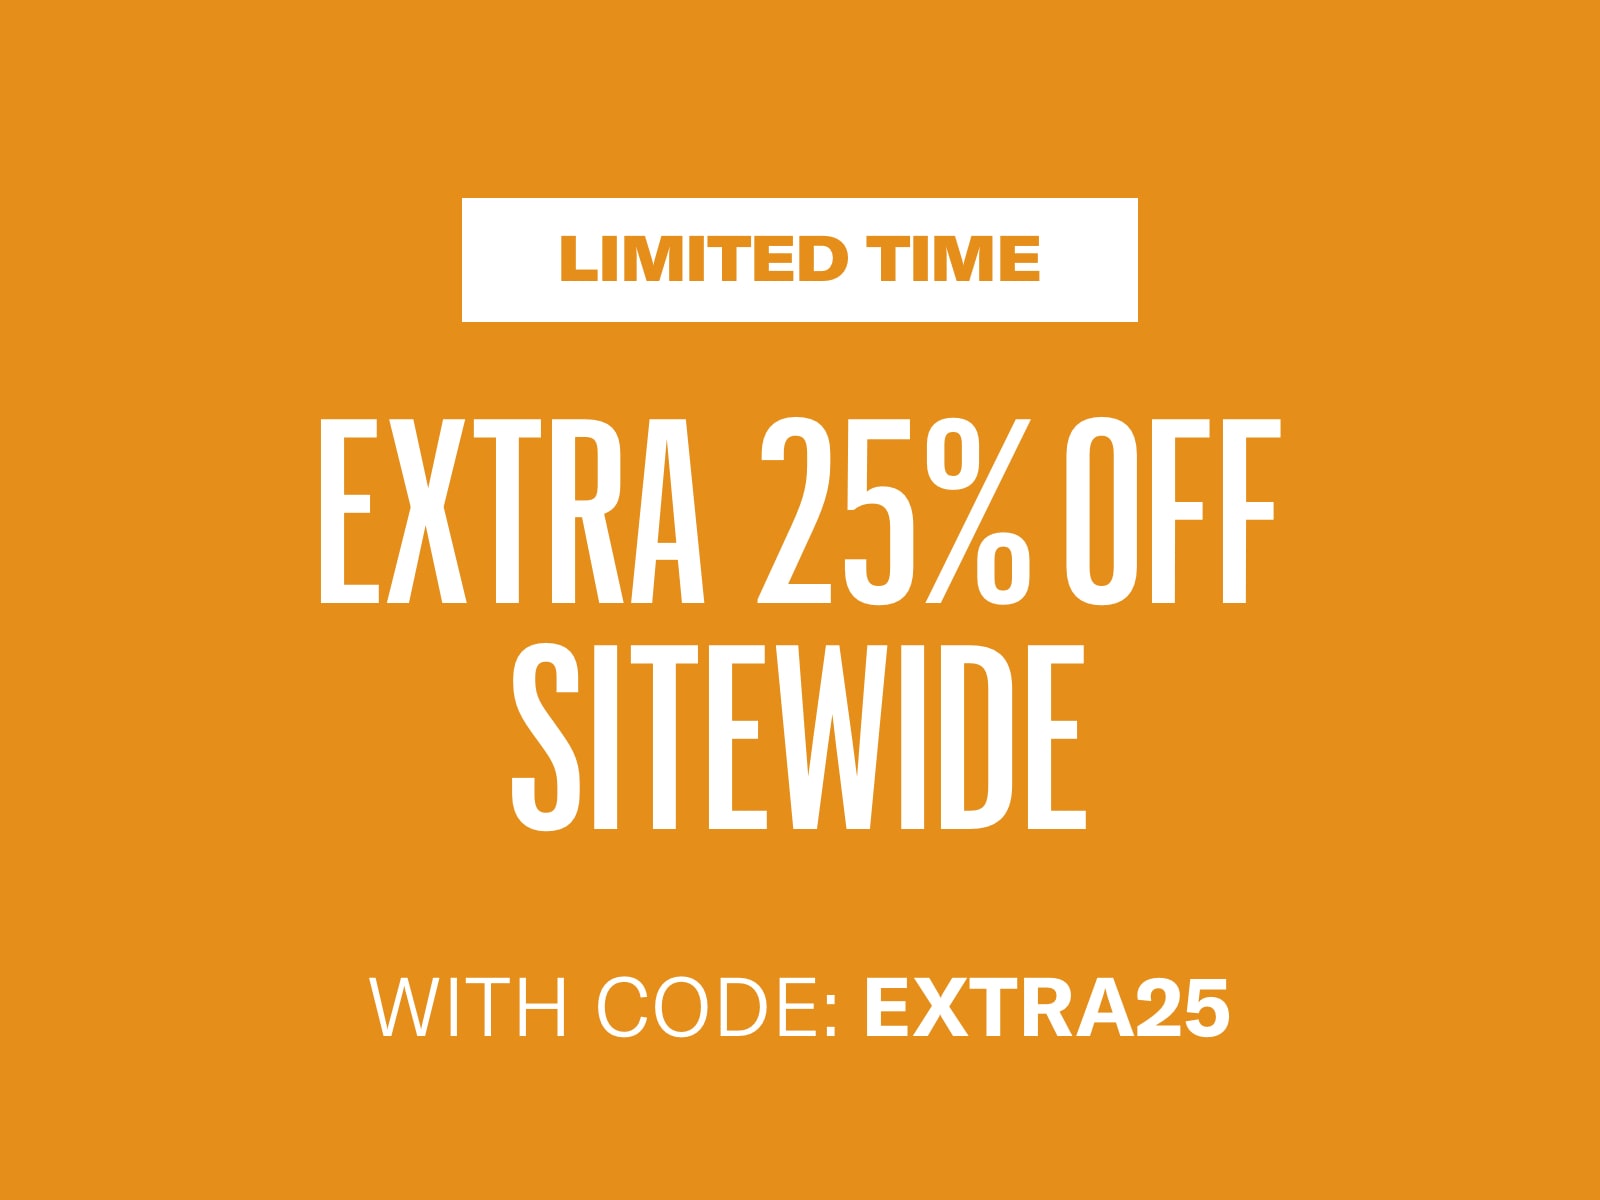 Limited Time Extra 25% off Sale with Code EXTRA25